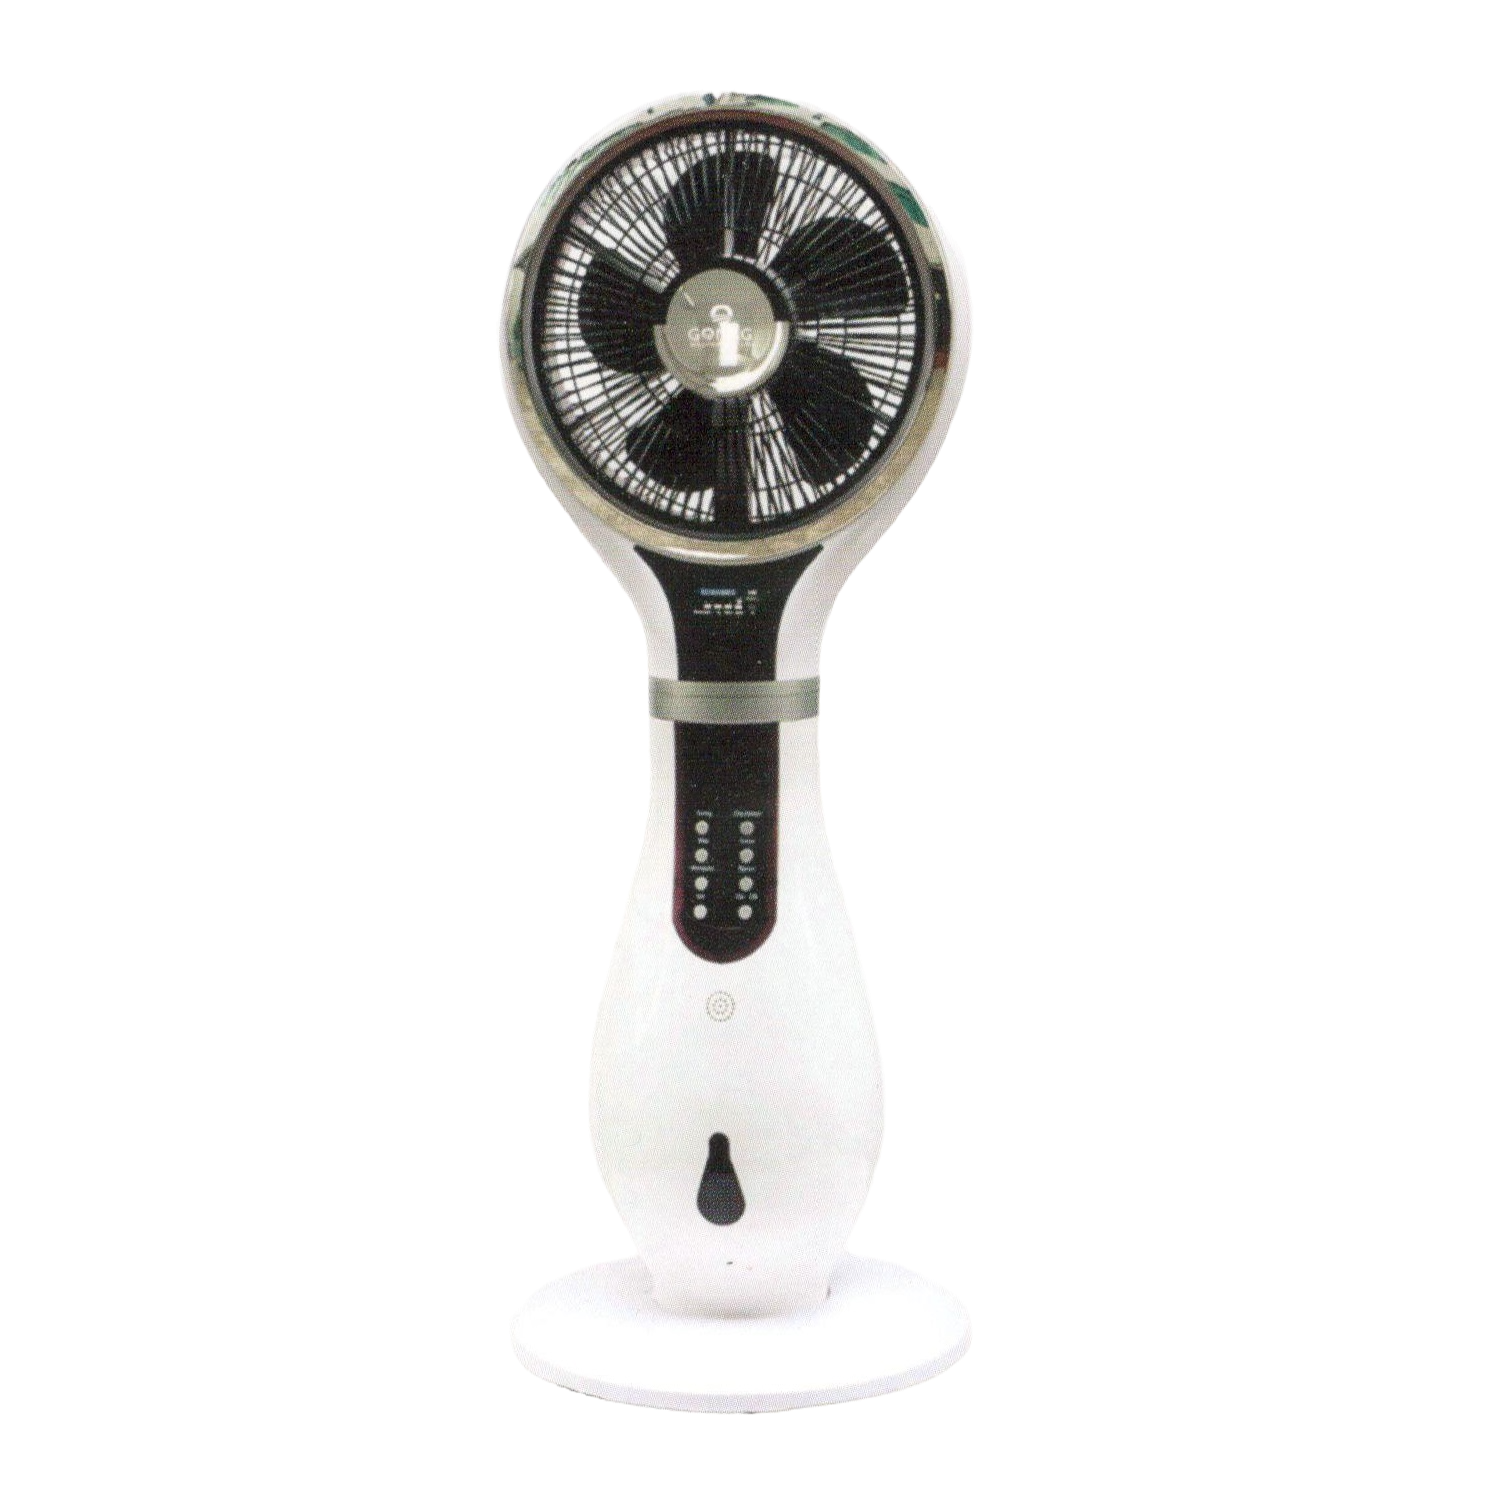 Gonag 5 in 1 Indoor Mist Fan with MP3 Player Water Tank Capacity 2.5 L 1011